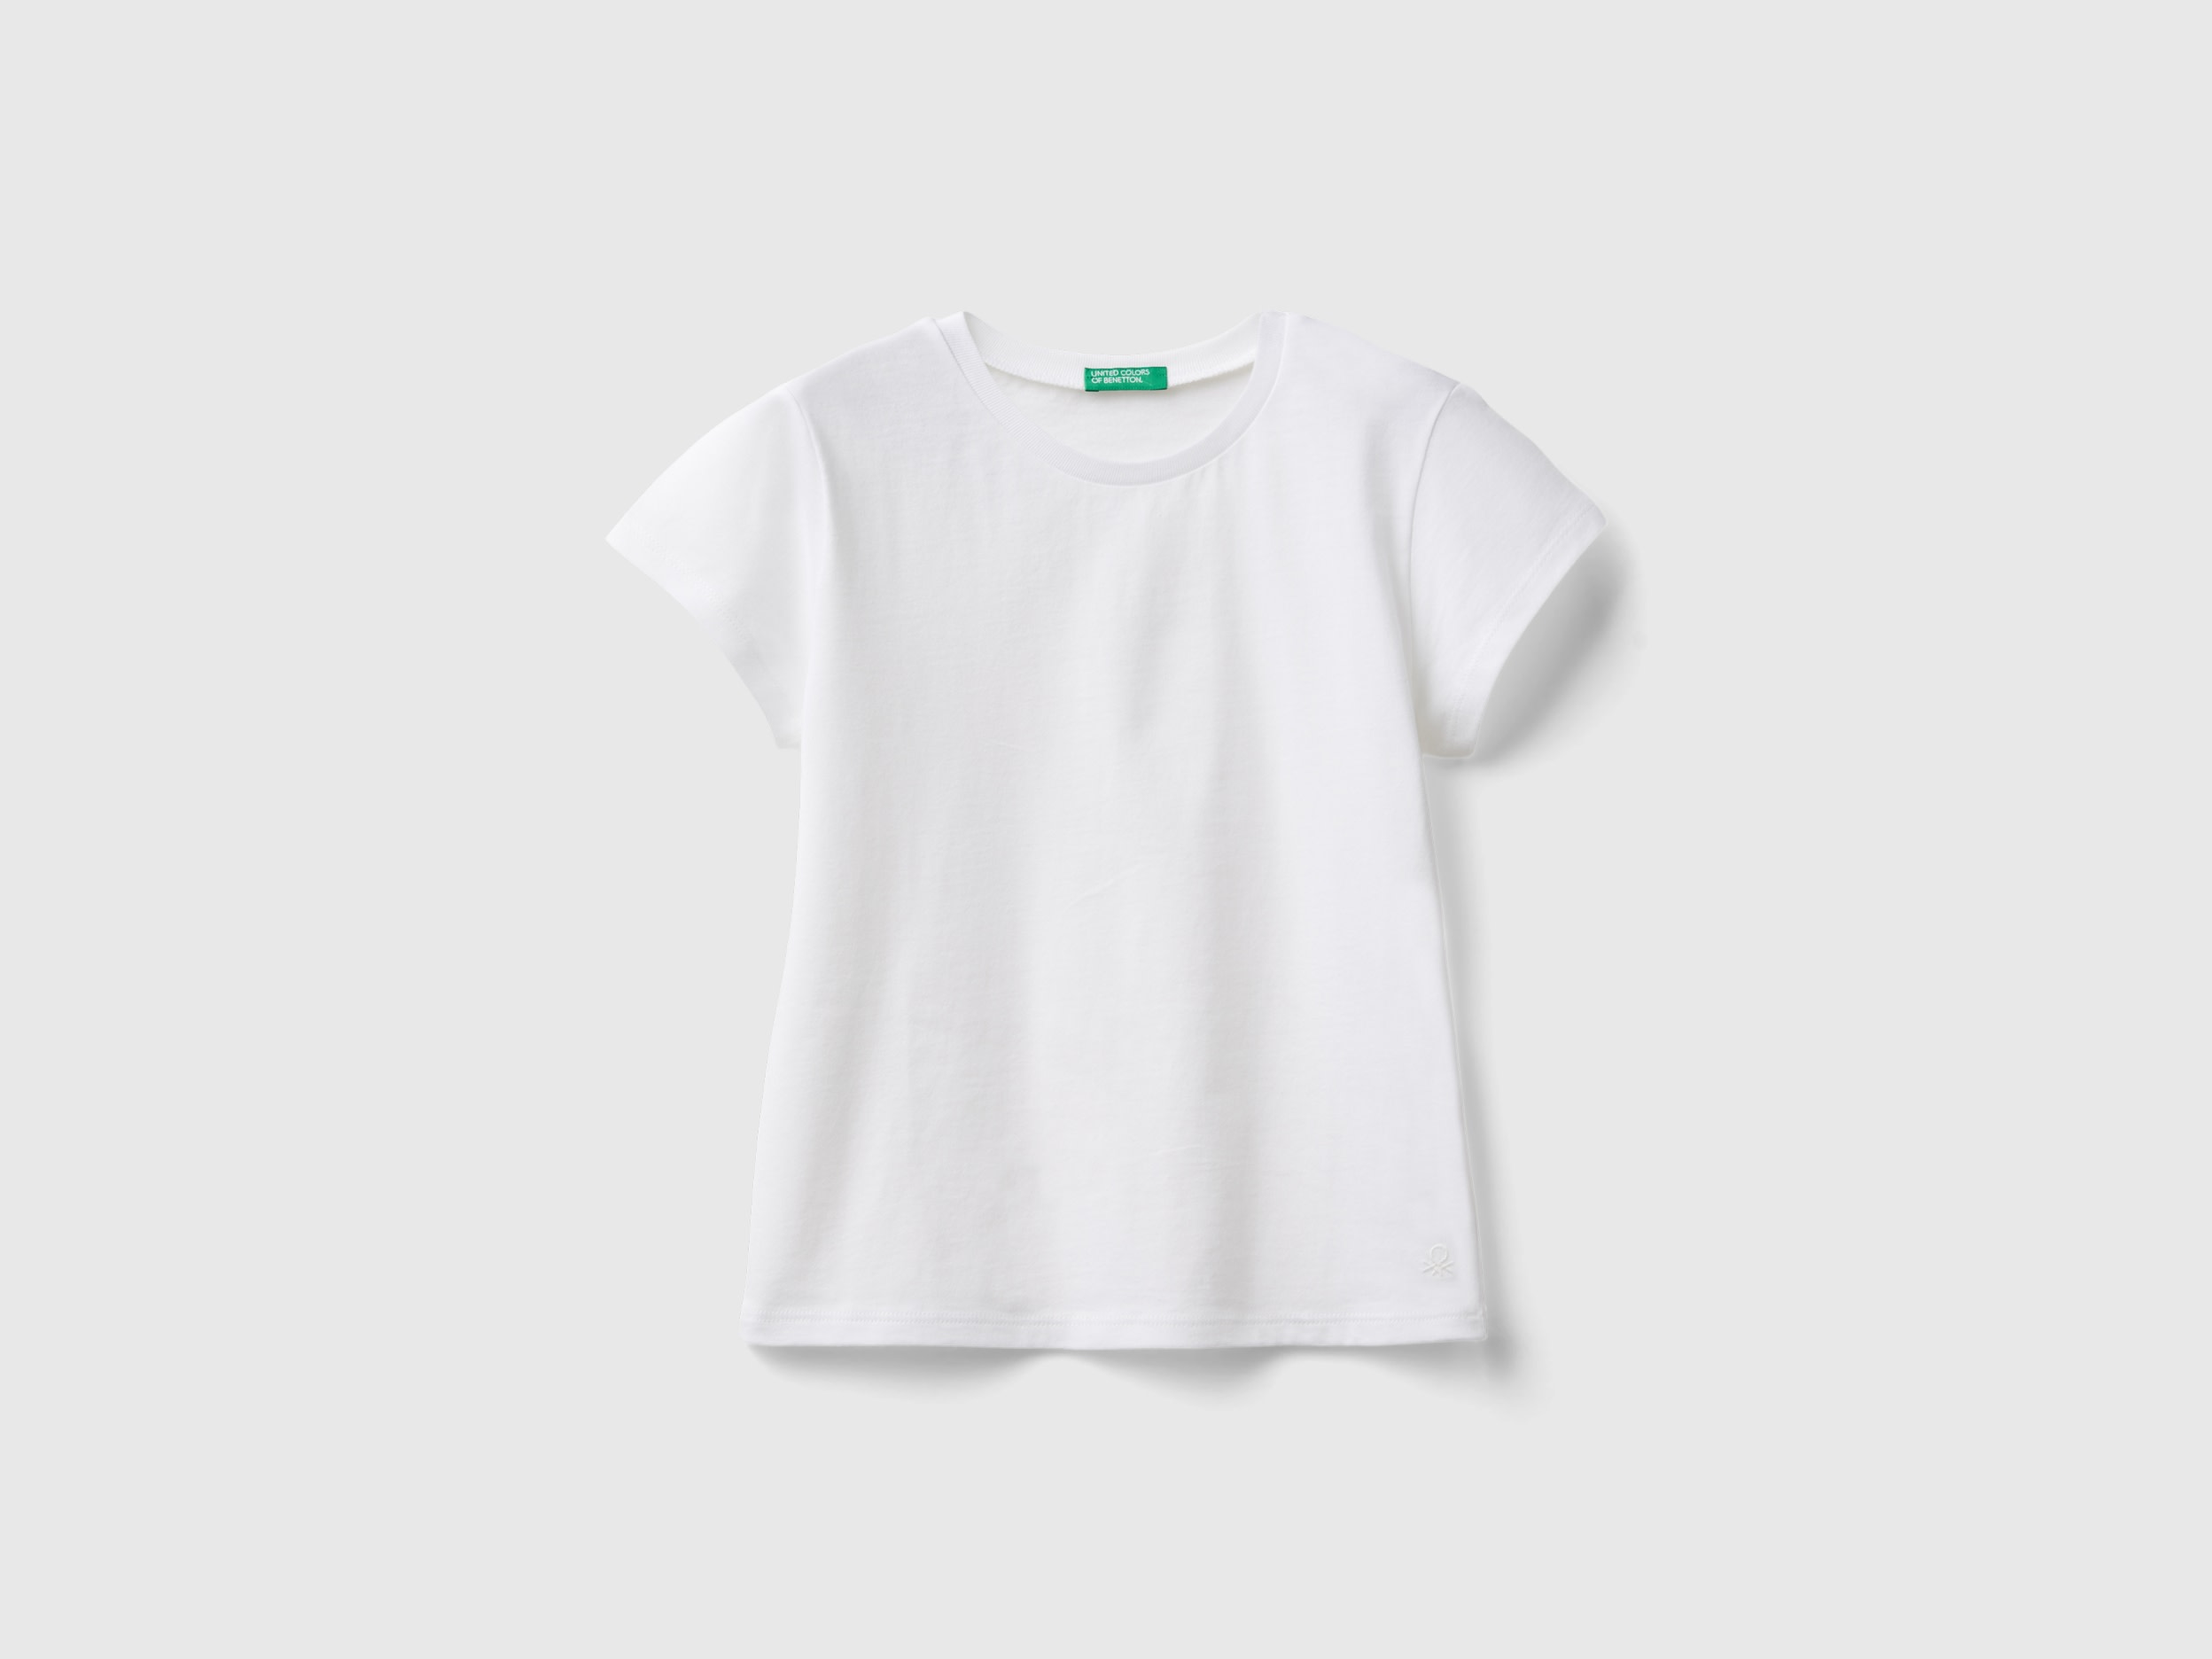 Image of Benetton, T-shirt In Pure Organic Cotton, size 2XL, White, Kids